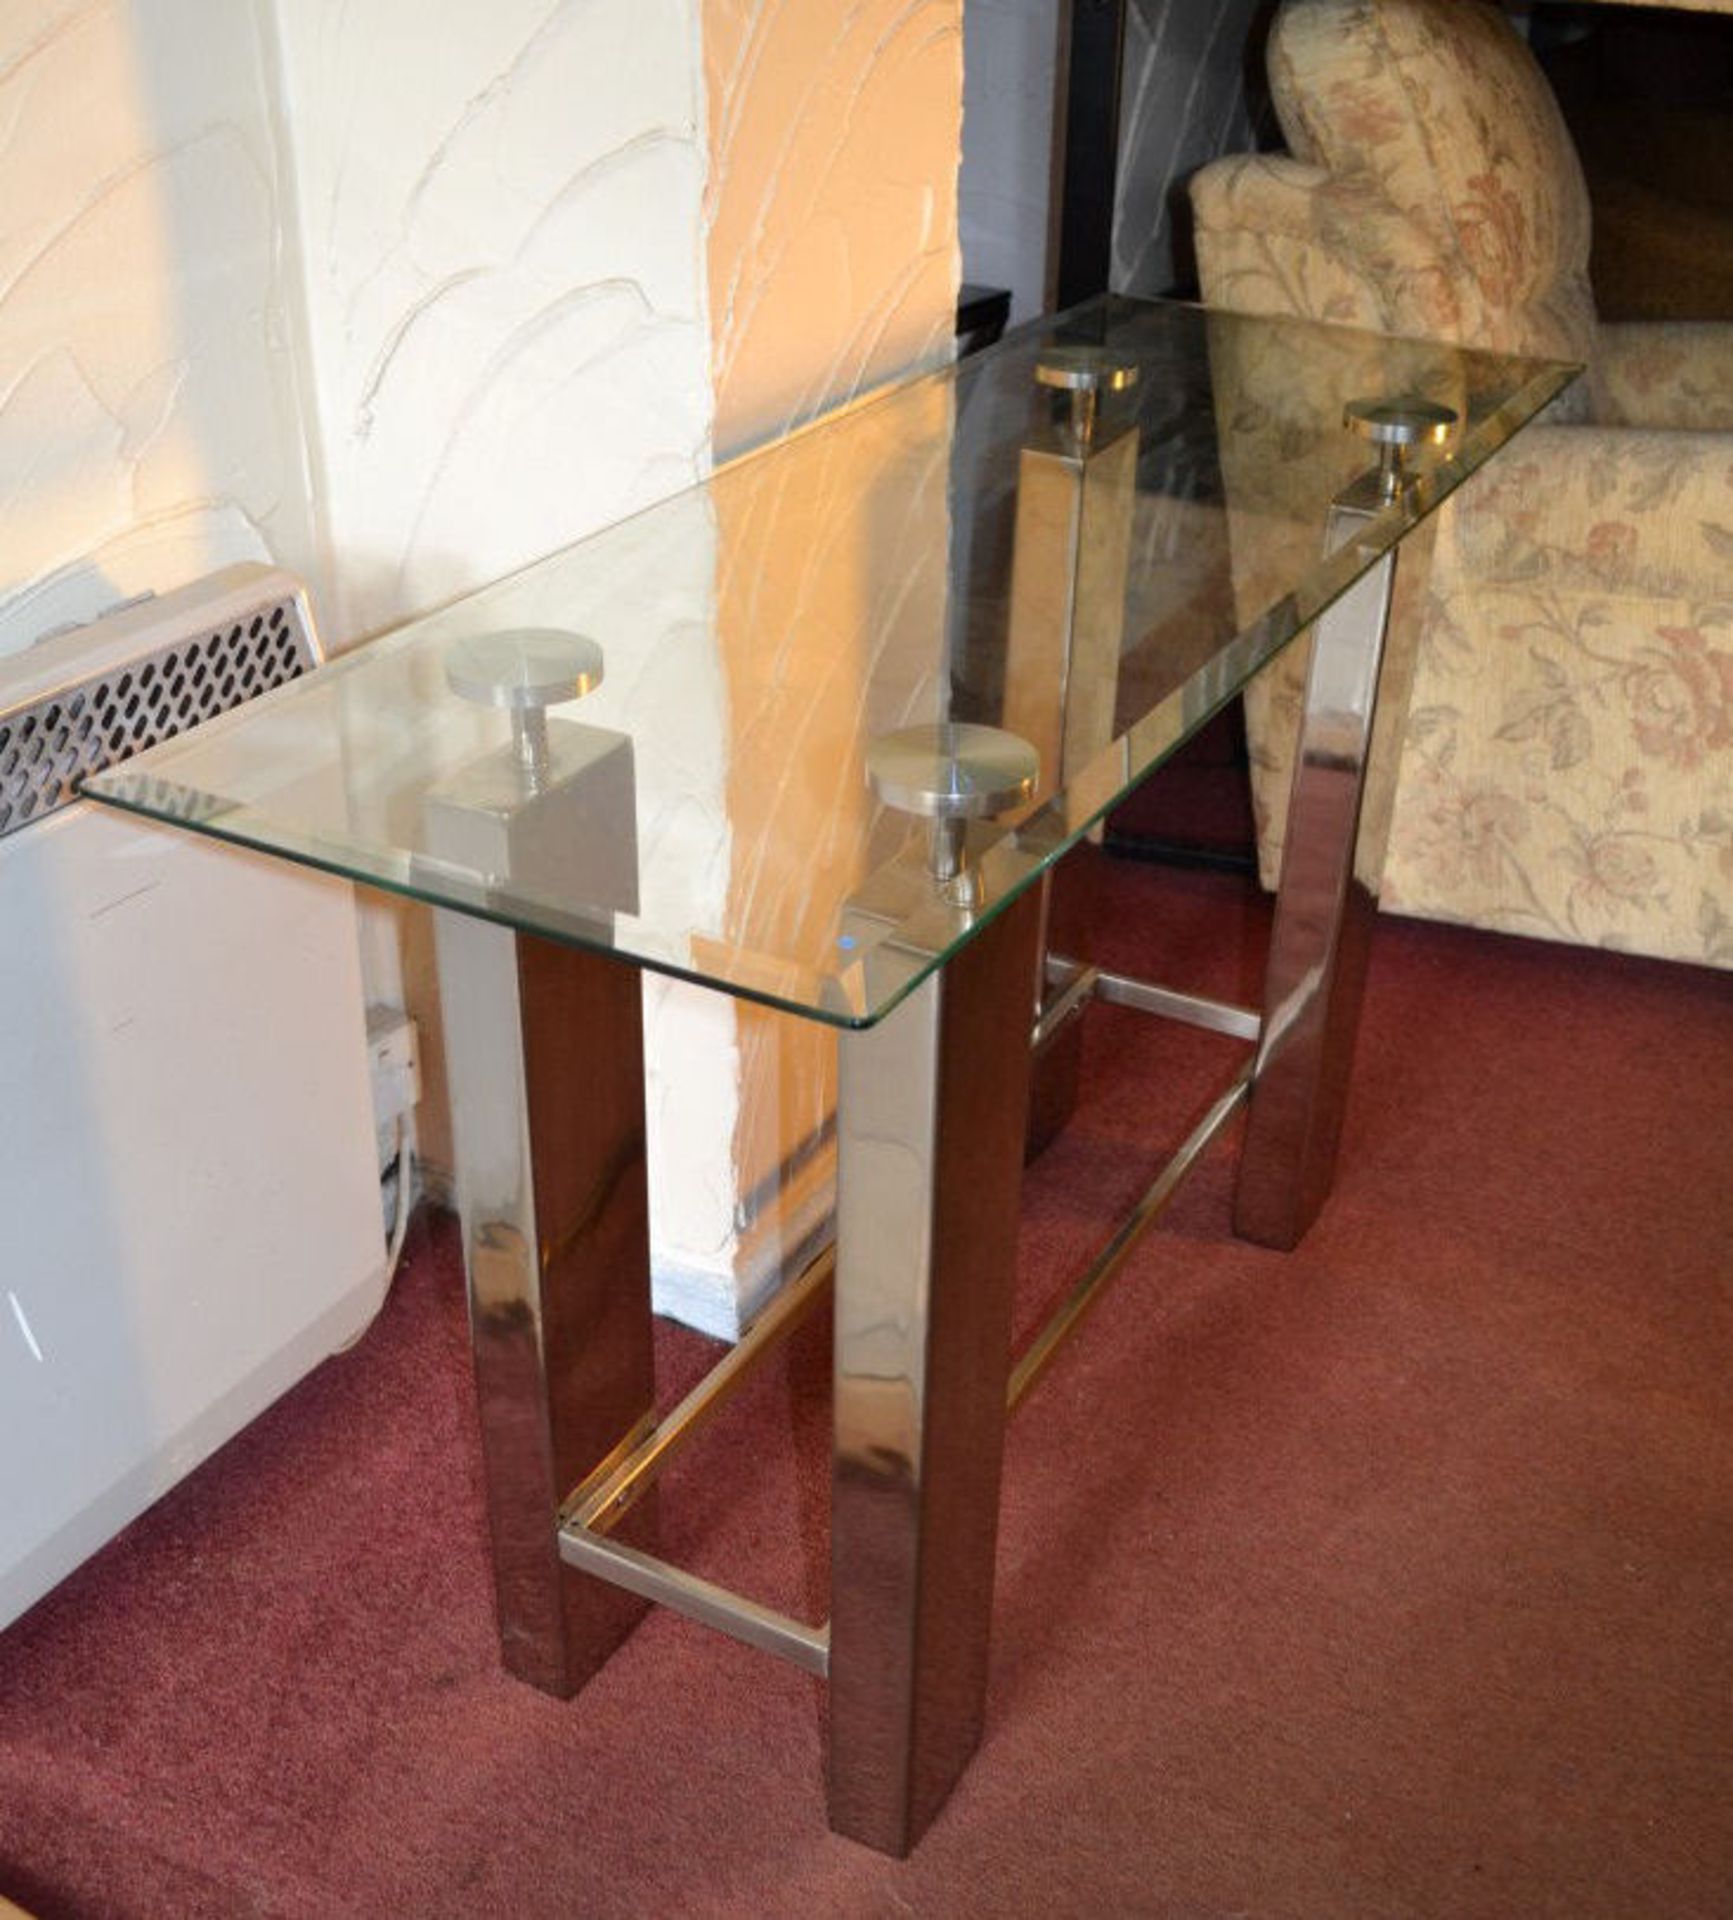 1 x Contemporary Glass Top Console Table With Silver Metal Legs - CL108 - Image 5 of 5